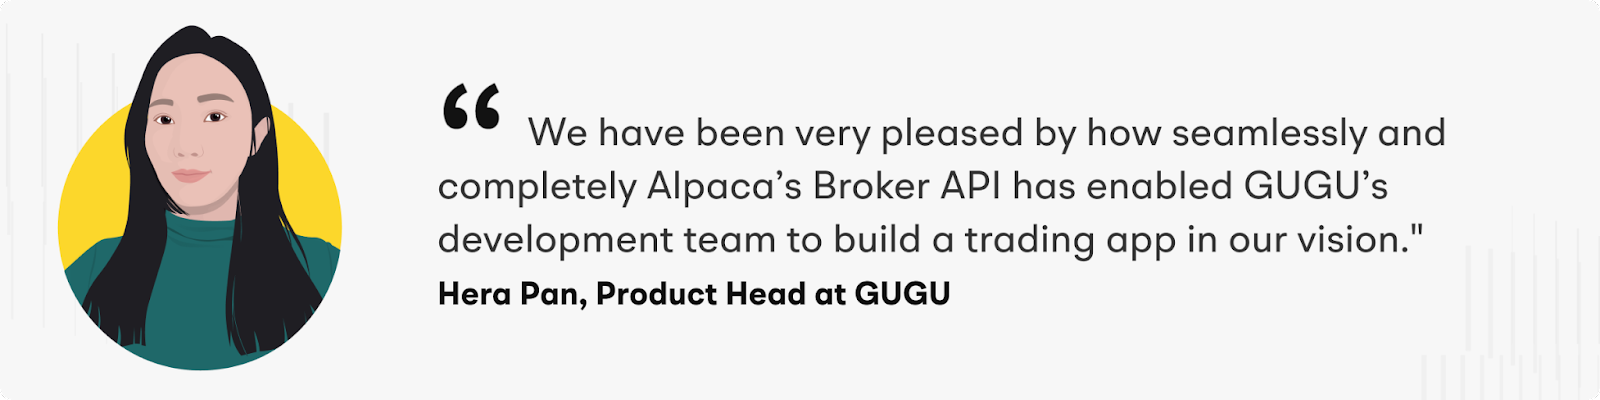 "We have been very pleased by how seamlessly and completely Alpaca’s Broker API has enabled GUGU’s development team to build a trading app in our vision." – Hera Pan, Product Head at GUGU